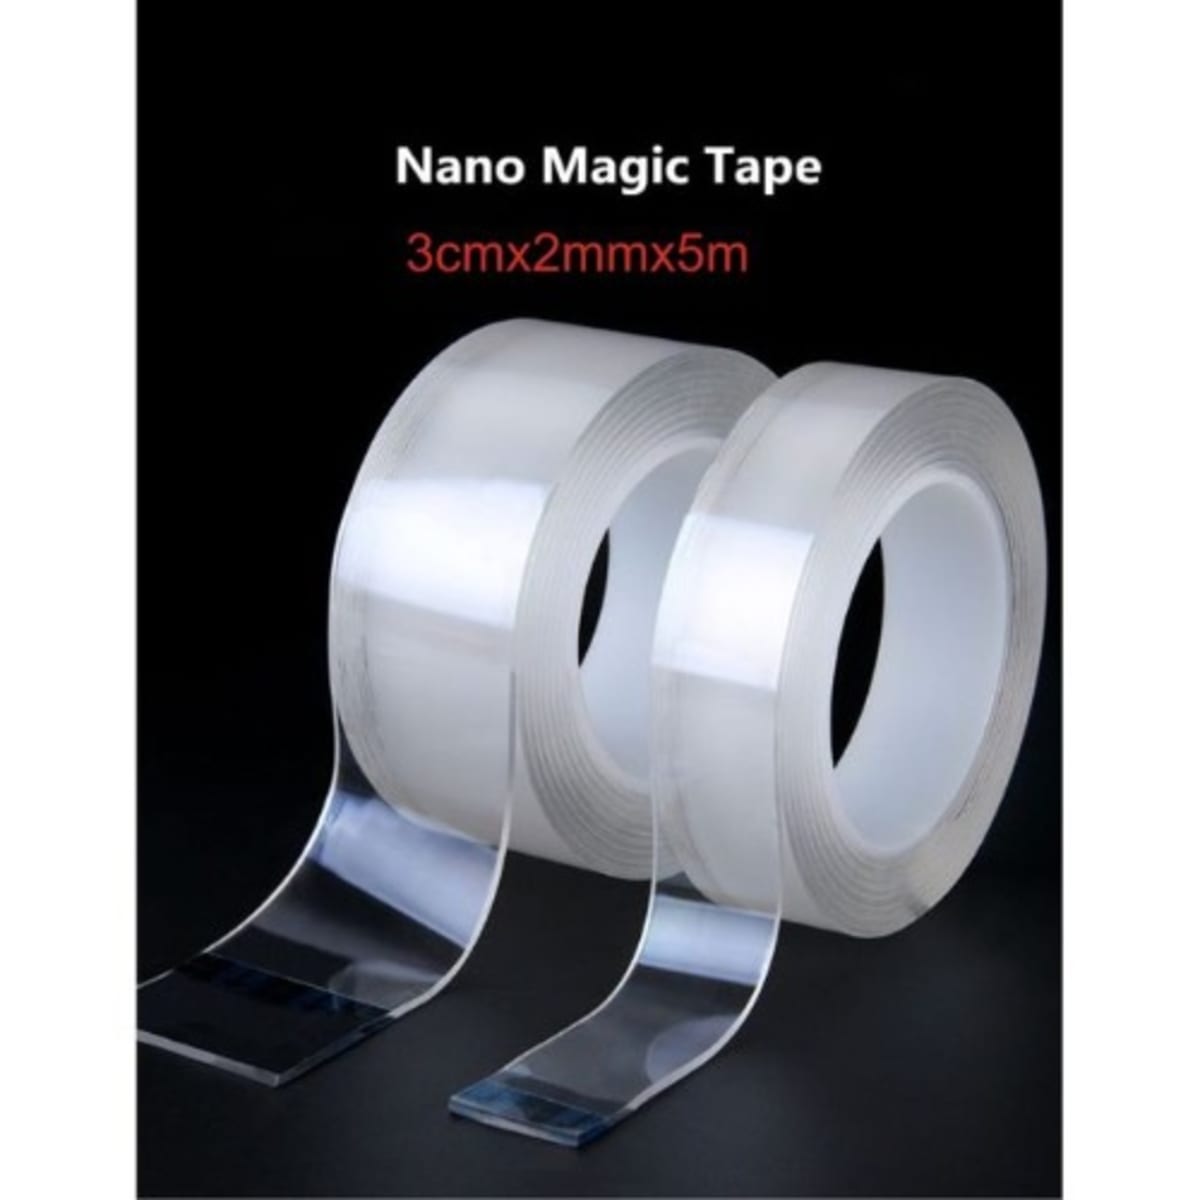 3M Double Sided Tape for Leather Crafting (2mm, 3mm, 4mm and 5mm rolls) –  Hands of Tym